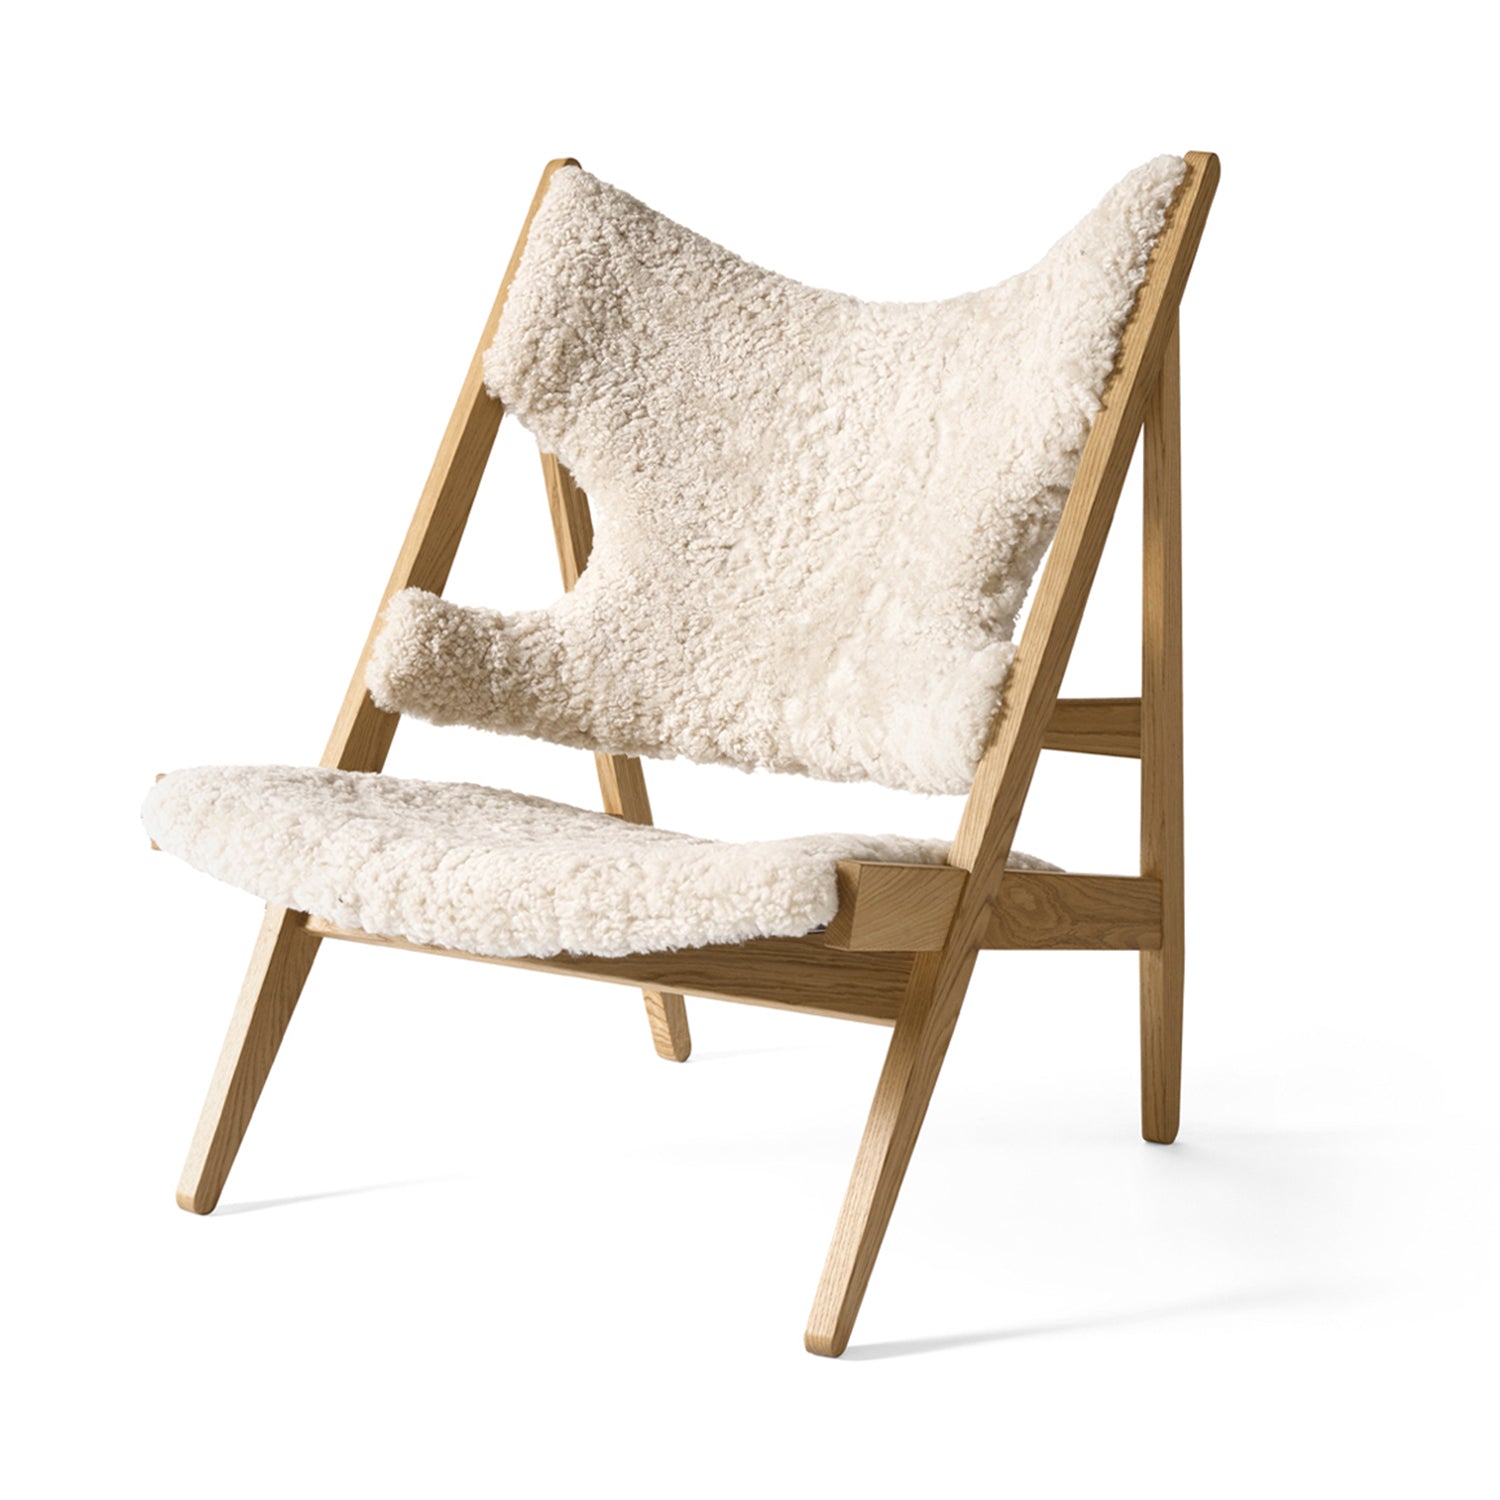 Knitting Lounge Chair - The Design Choice